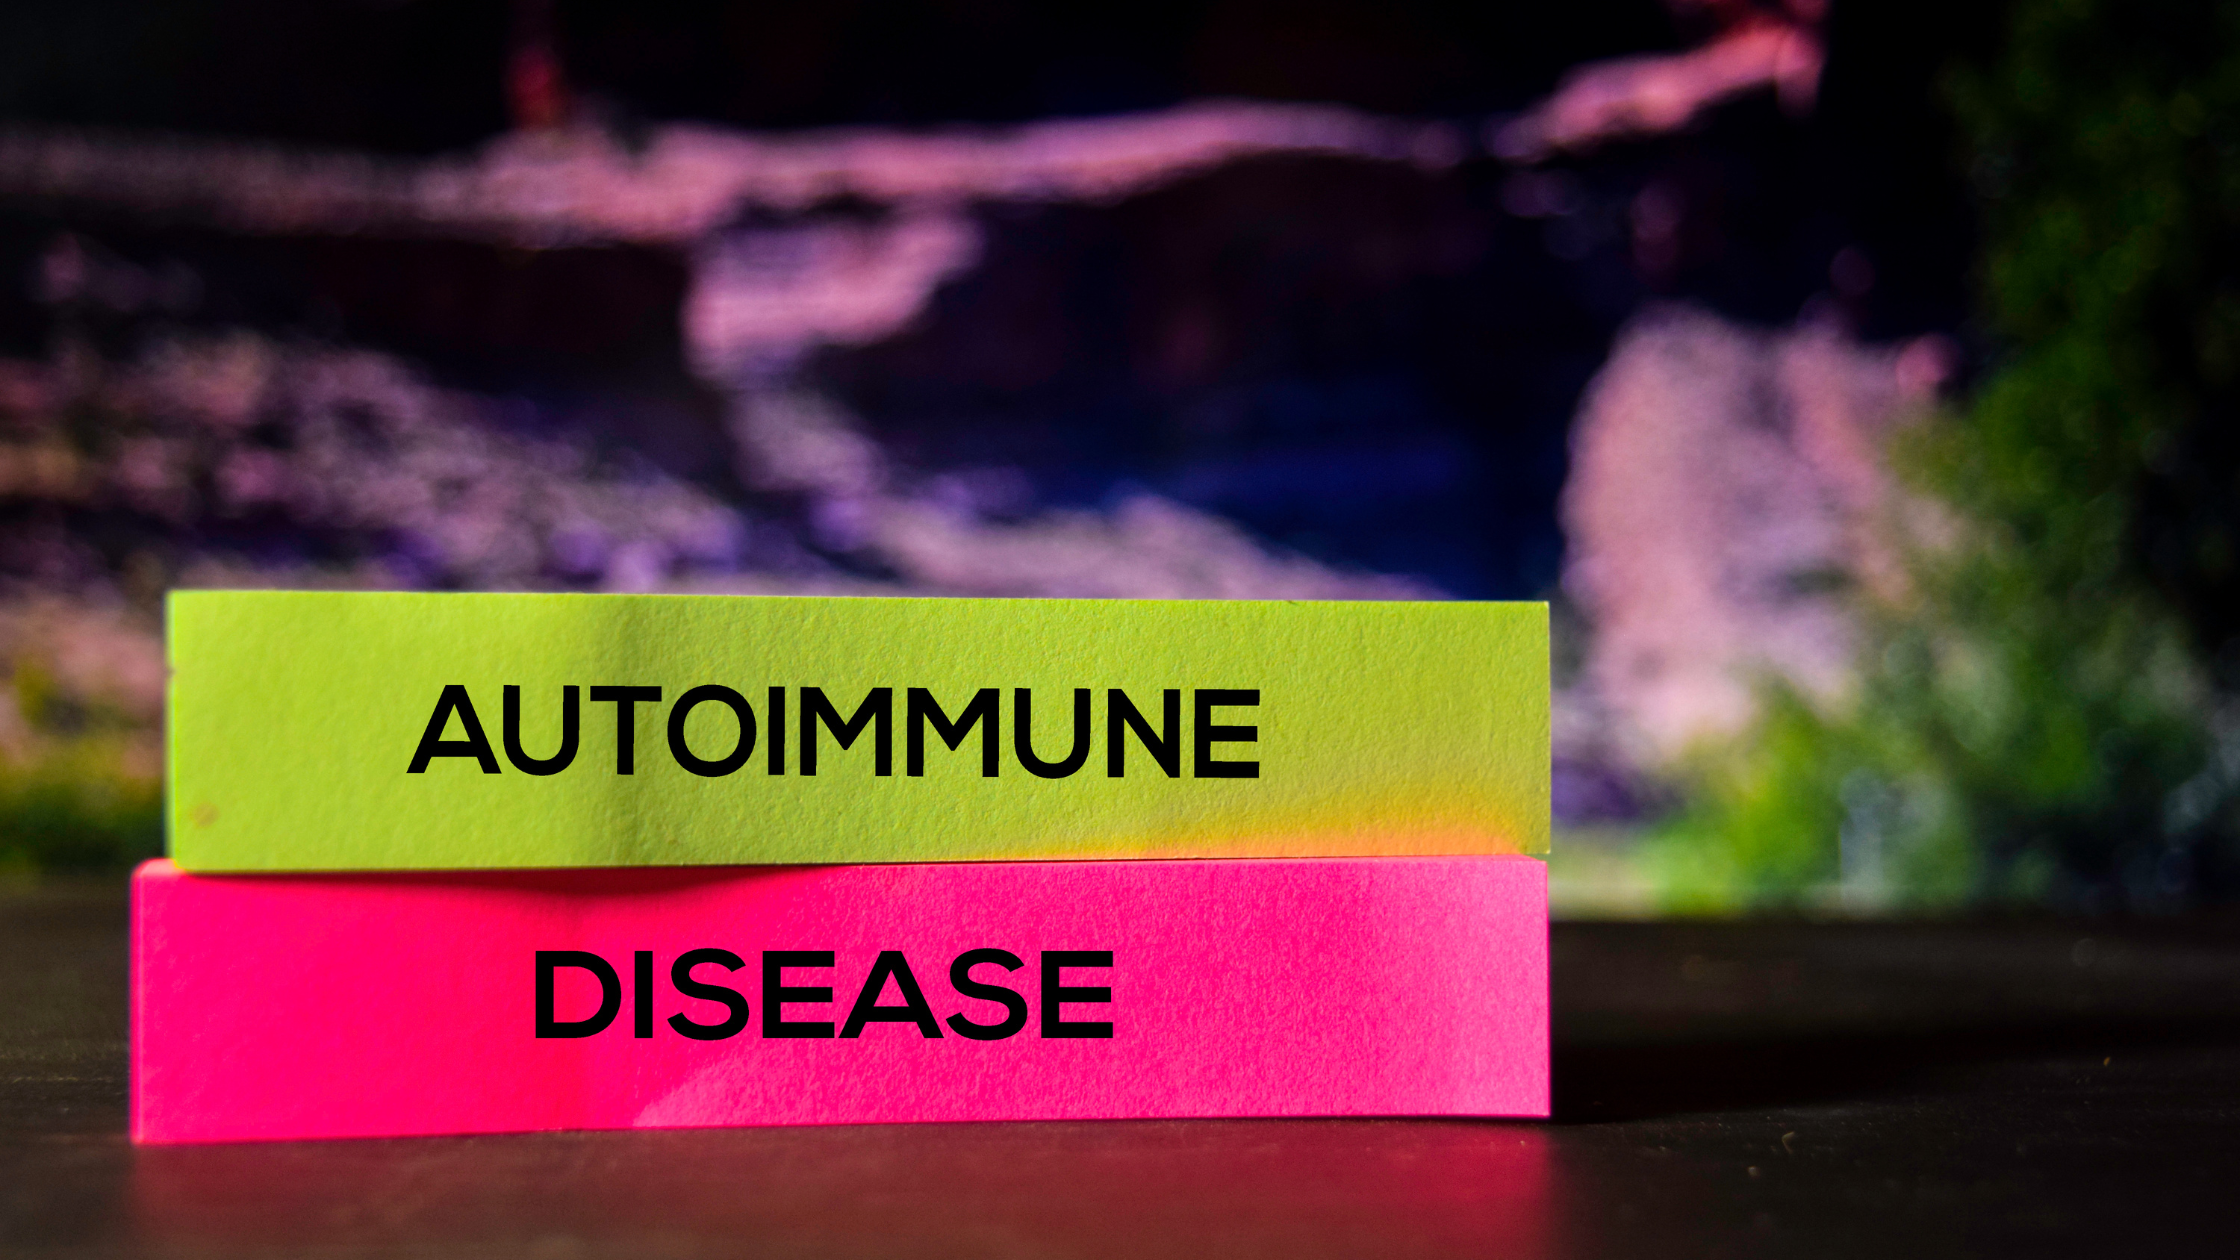 sticky notes reading "autoimmune" and "disease"